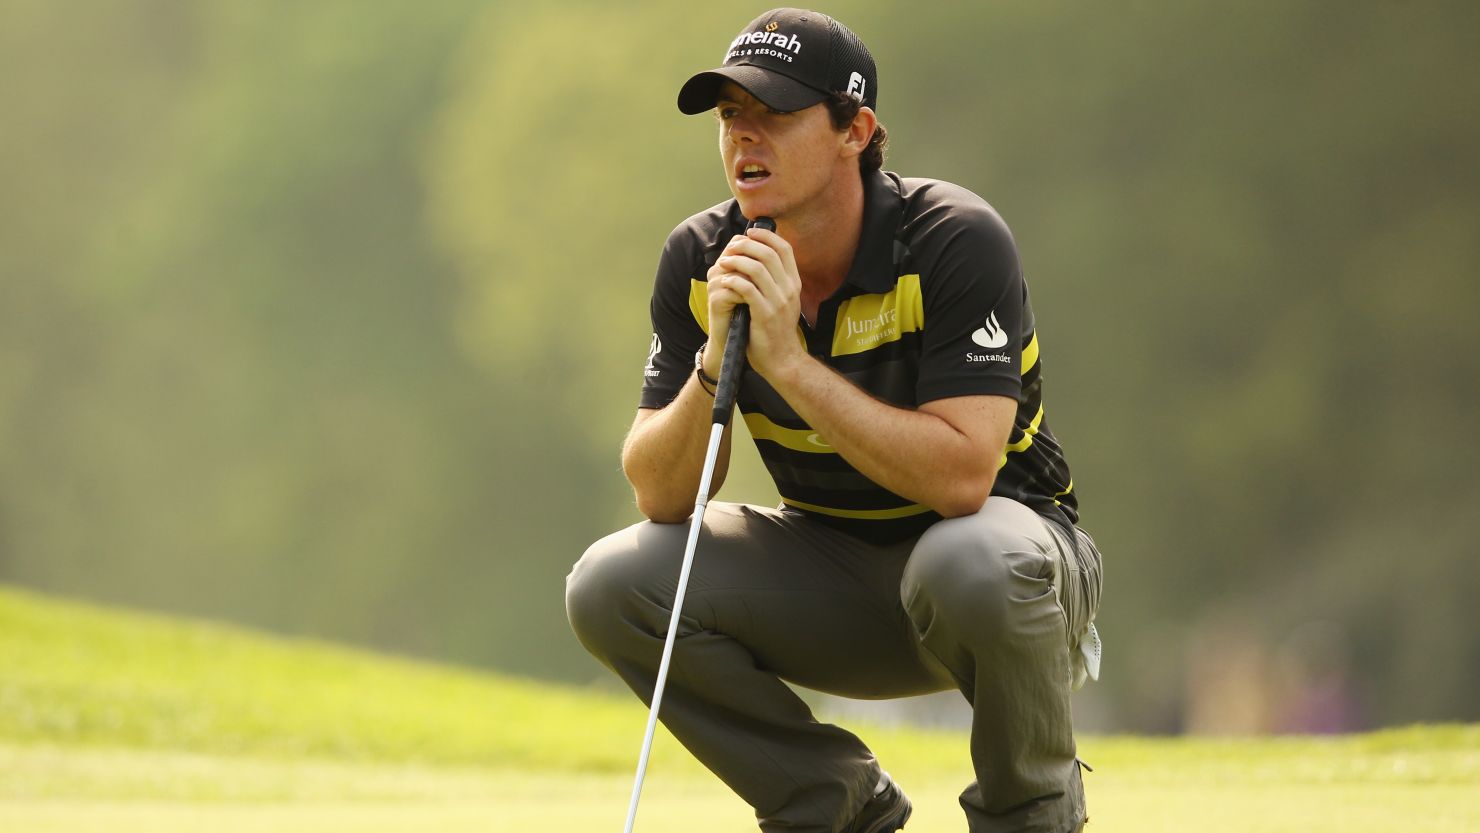 World No. 1 Rory McIlroy struggled on the opening day of the BMW PGA Championship at Wentworth